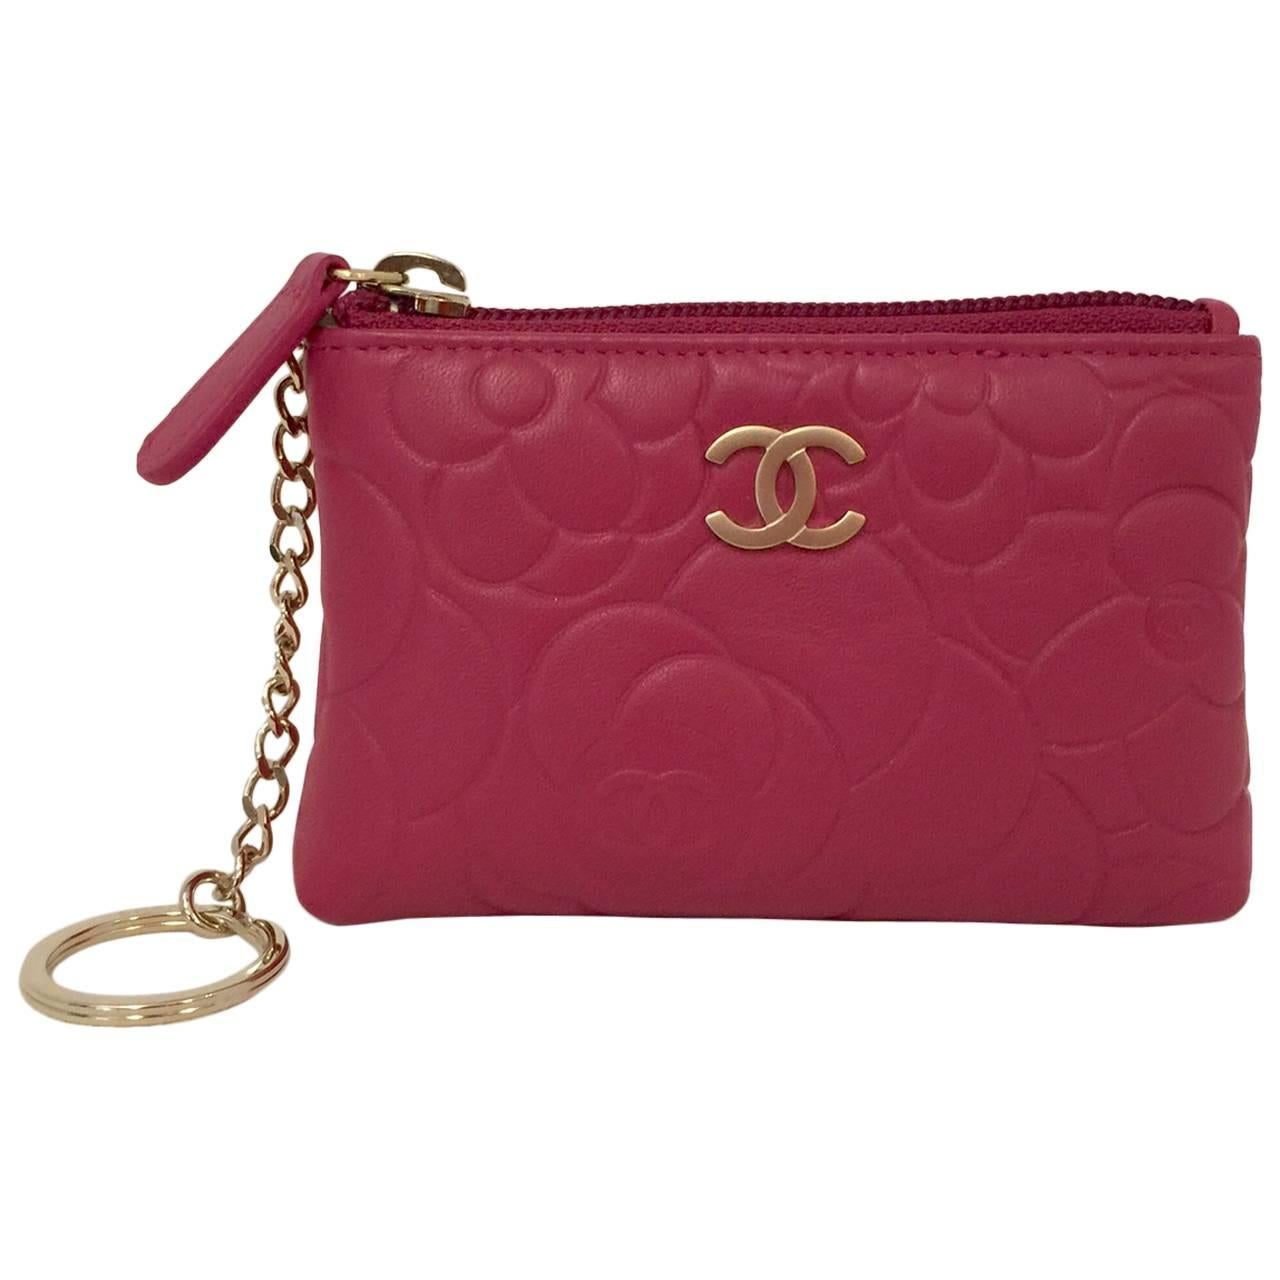 Chanel Fuchsia Camellia Stamped Leather O-Key Holder With Box Serial No 16132442